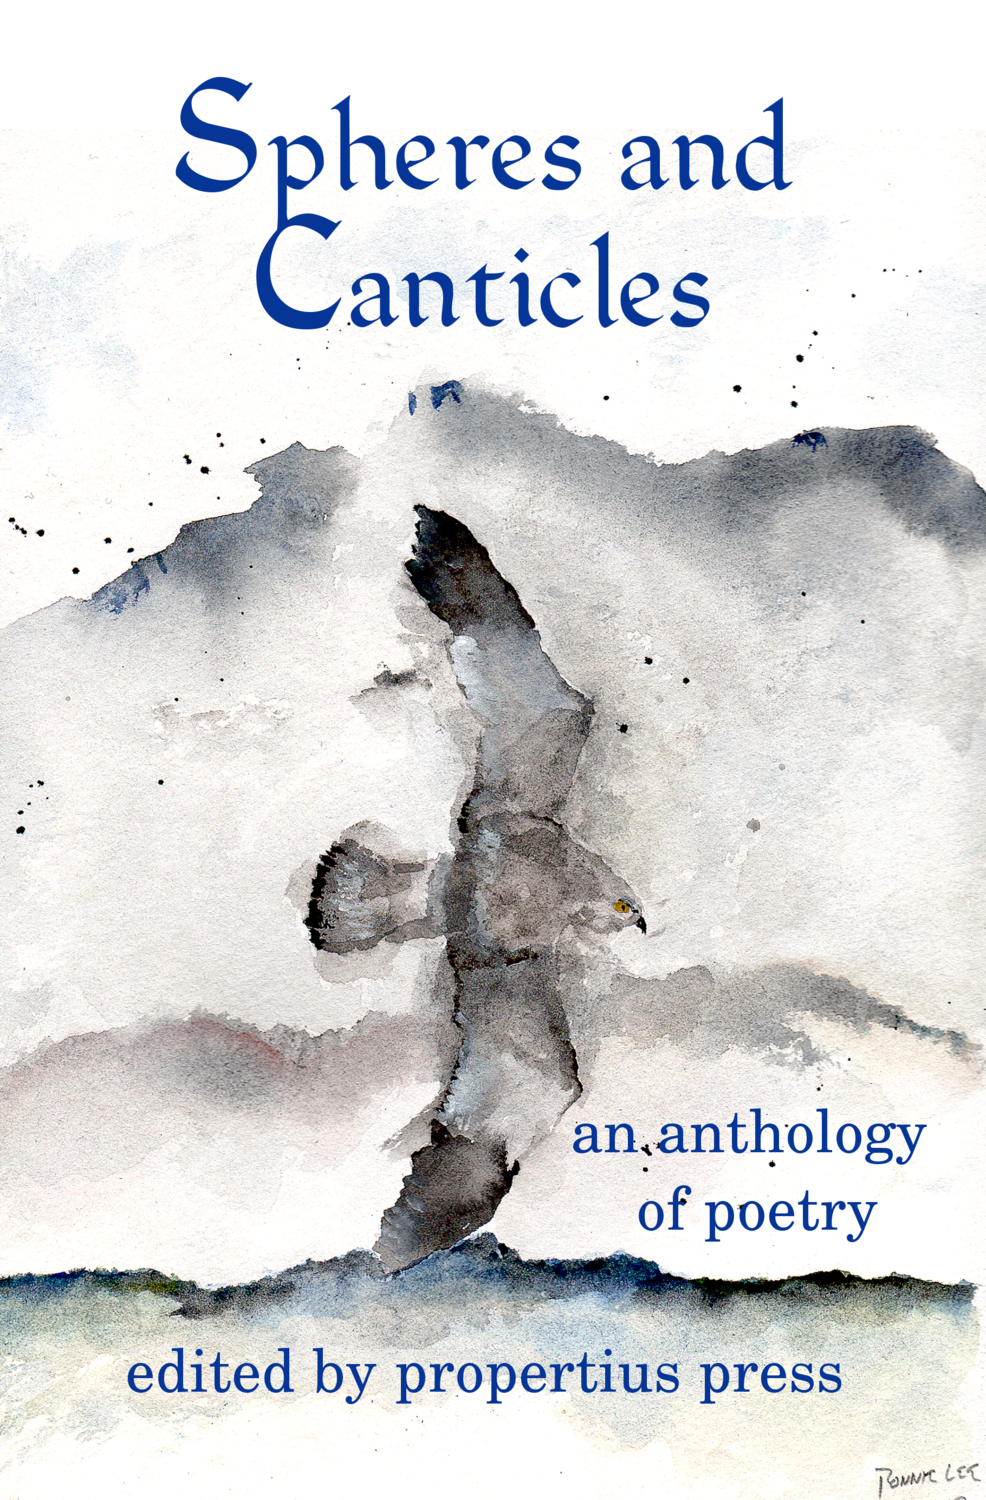 Spheres and Canticles, Our Inaugural Poetry Anthology